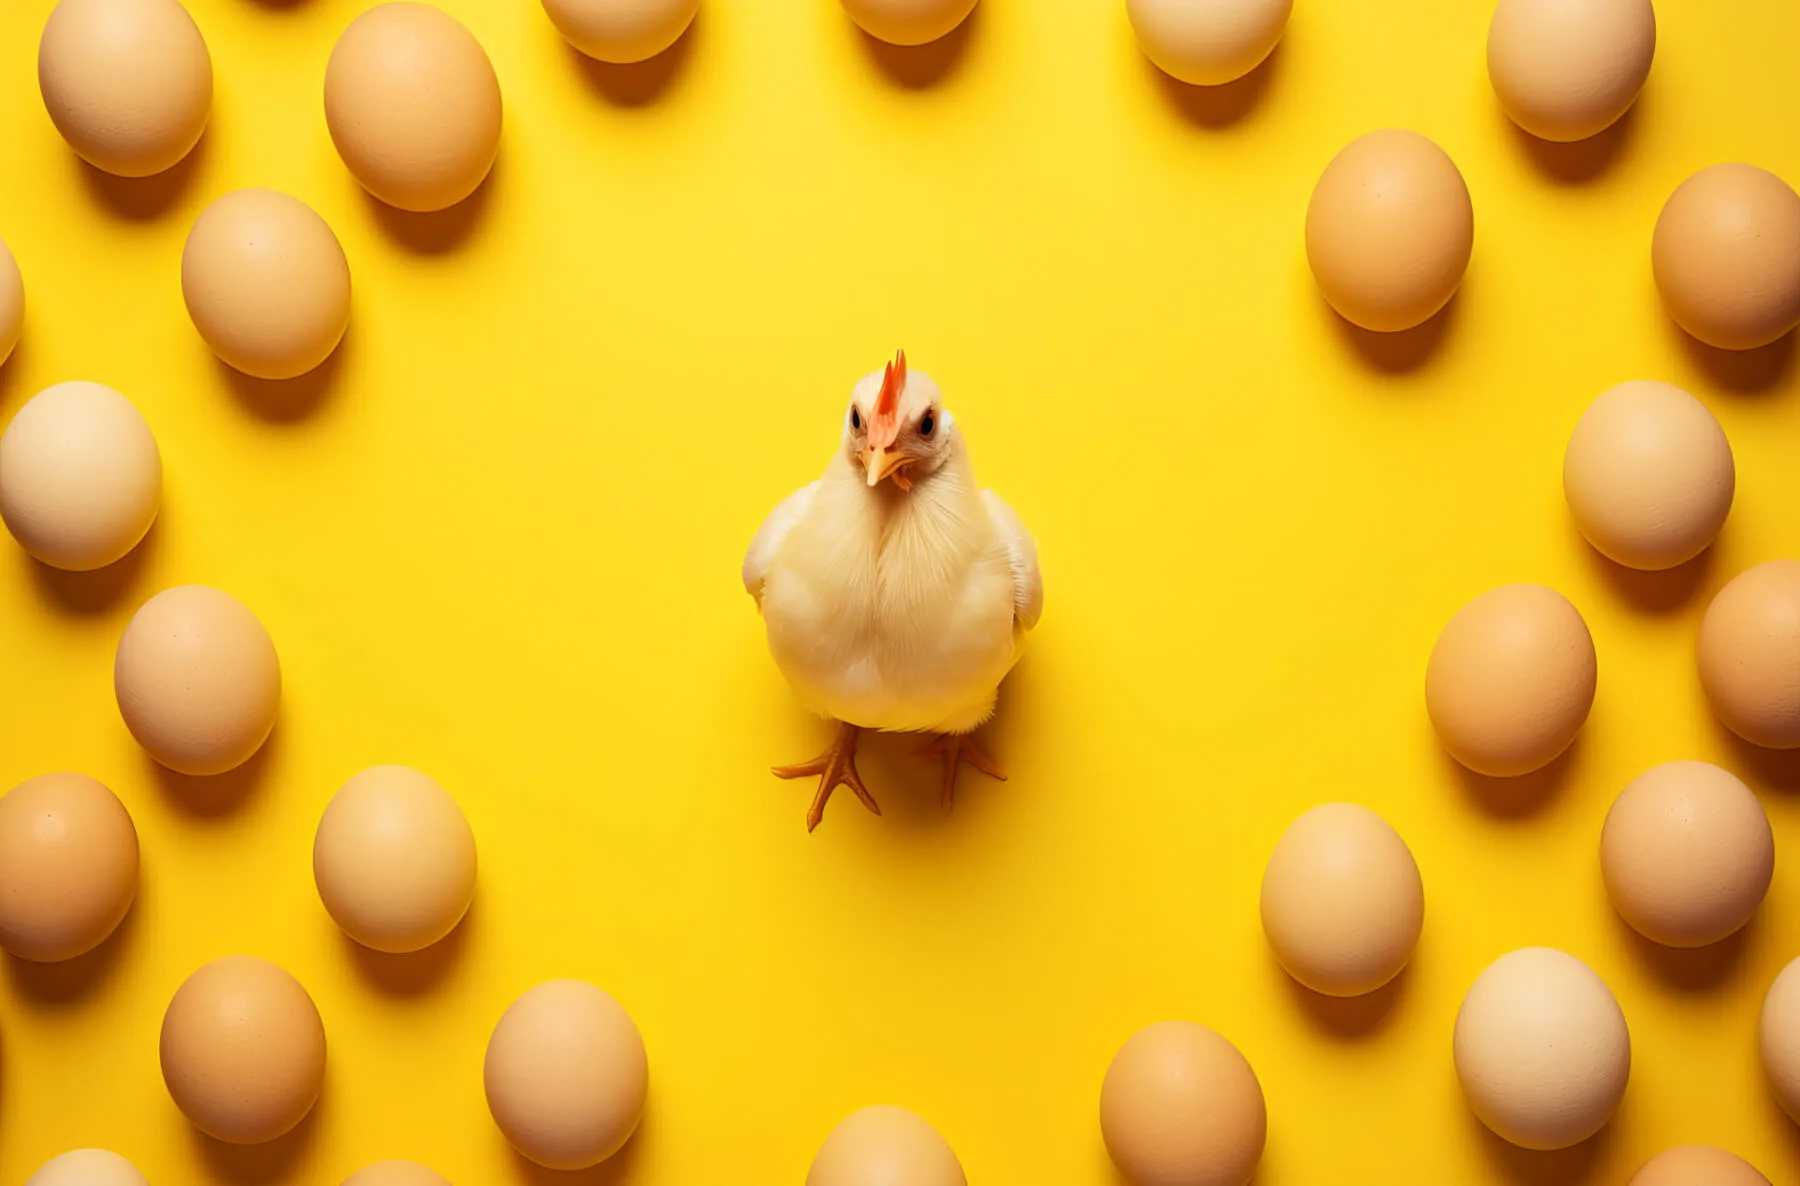 A chicken surrounded by eggs on a yellow background